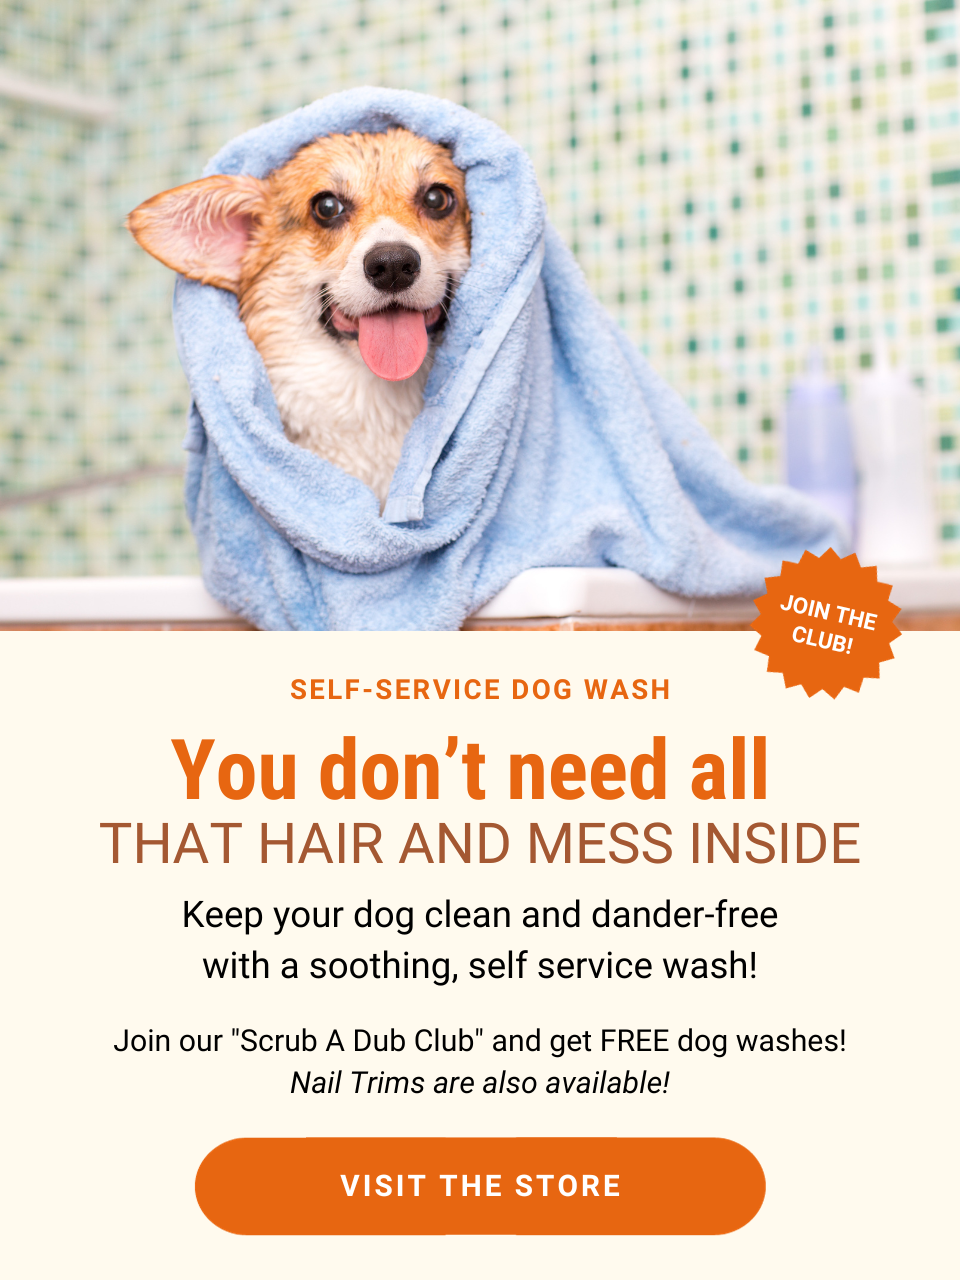 You don't need all that hair and mess inside! Keep your dog clean and dander-free with a soothing, self service wash!